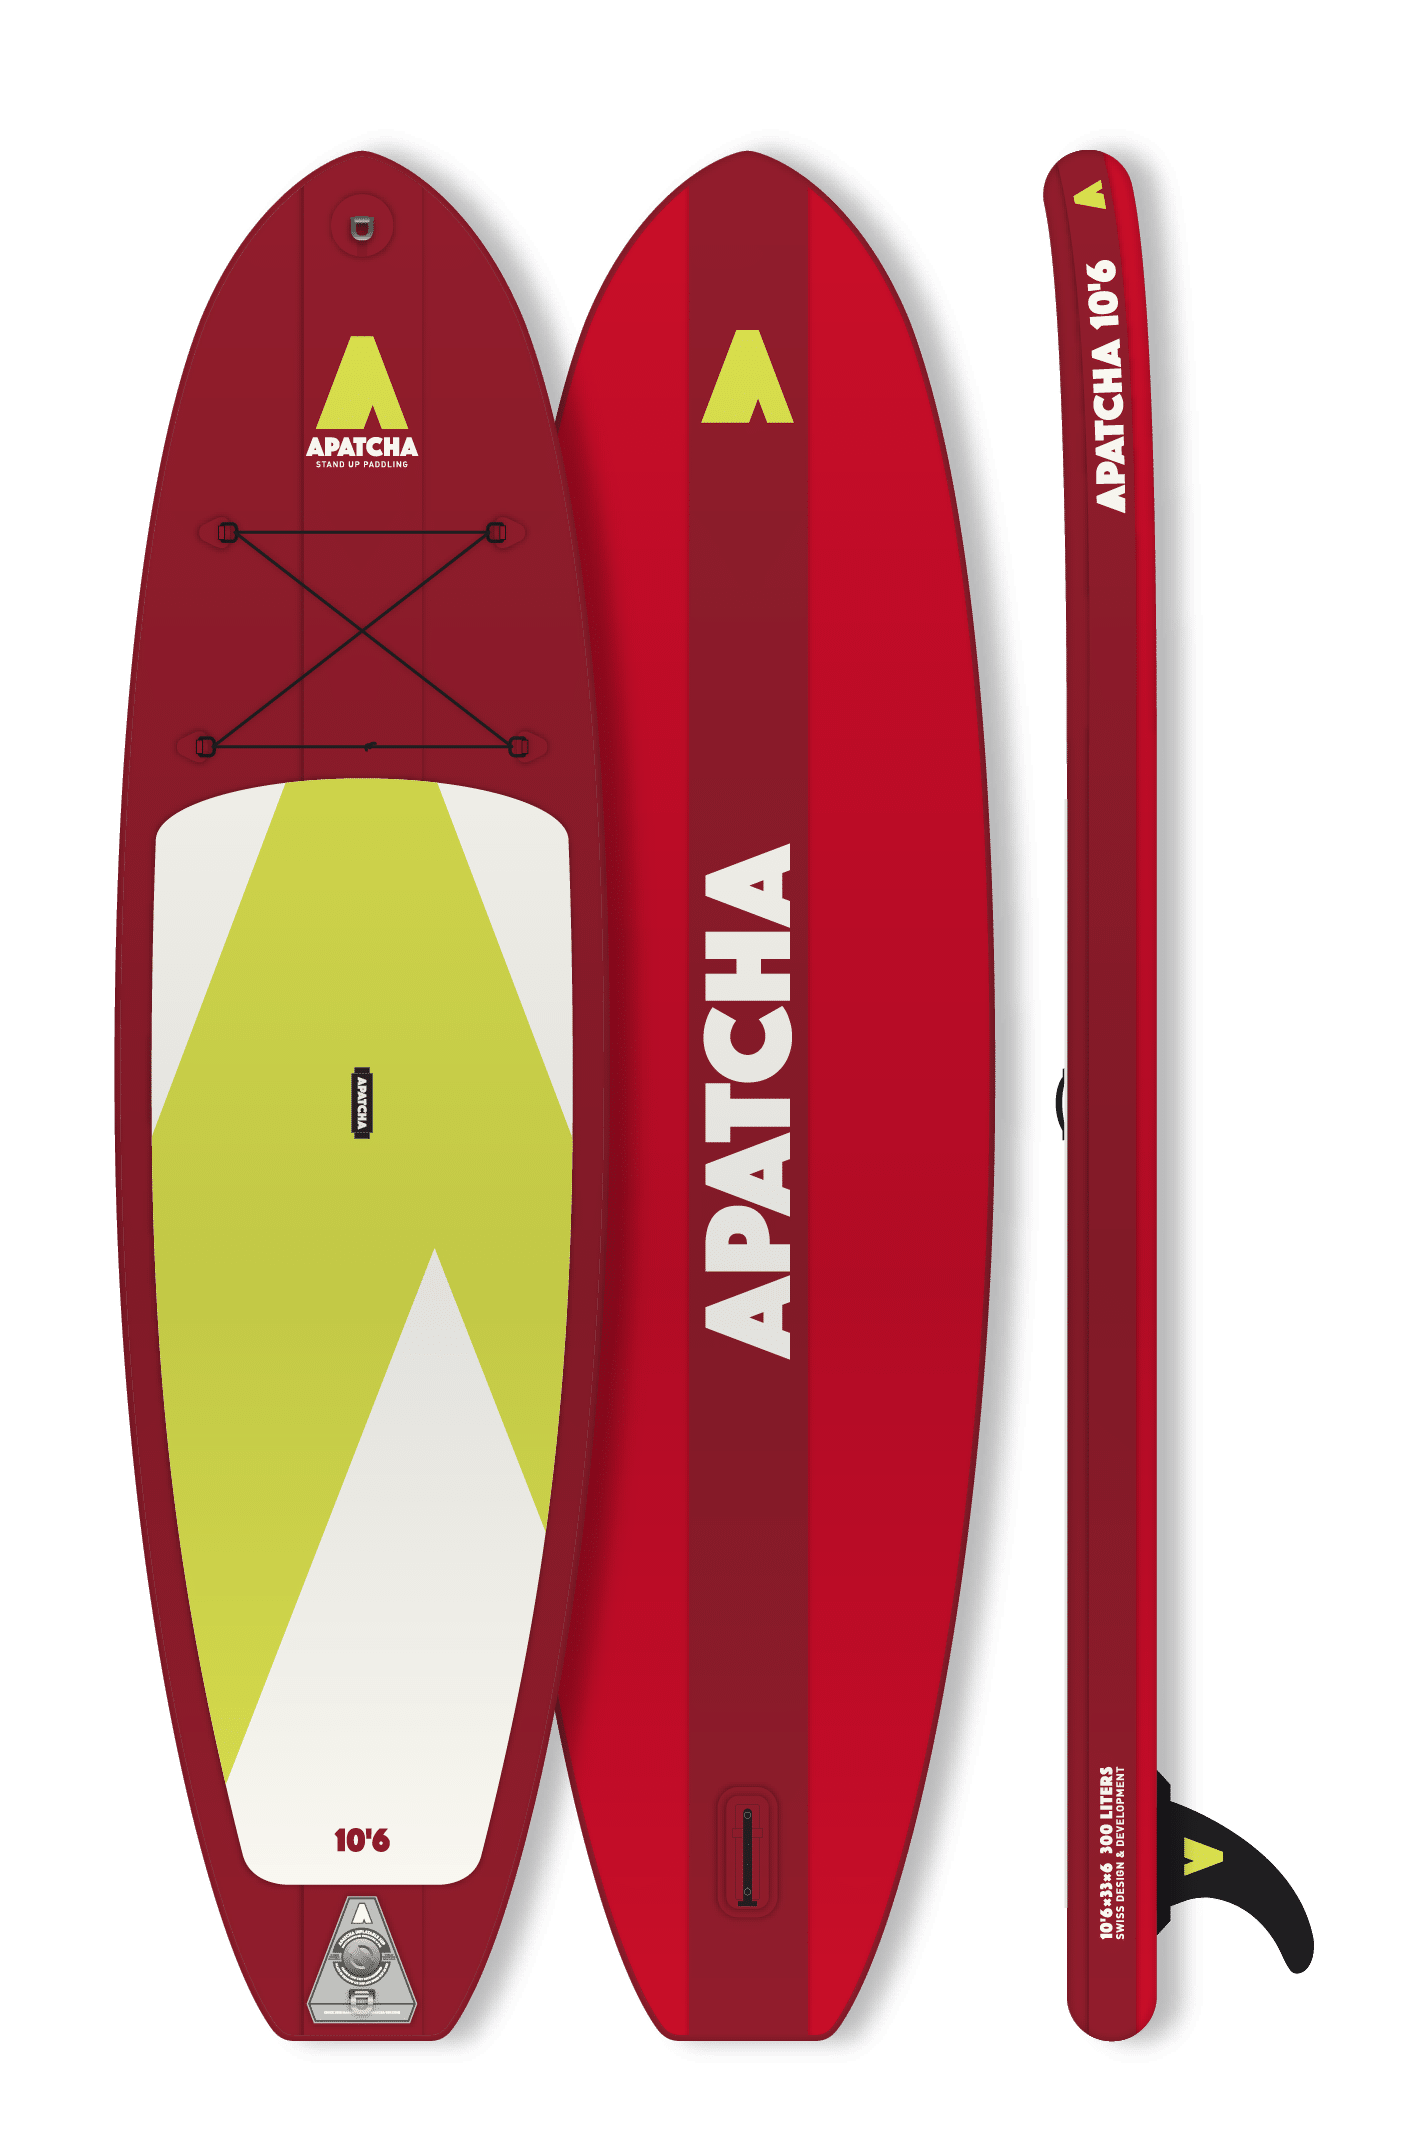 Apatcha Allround 10'6 Fire-RED